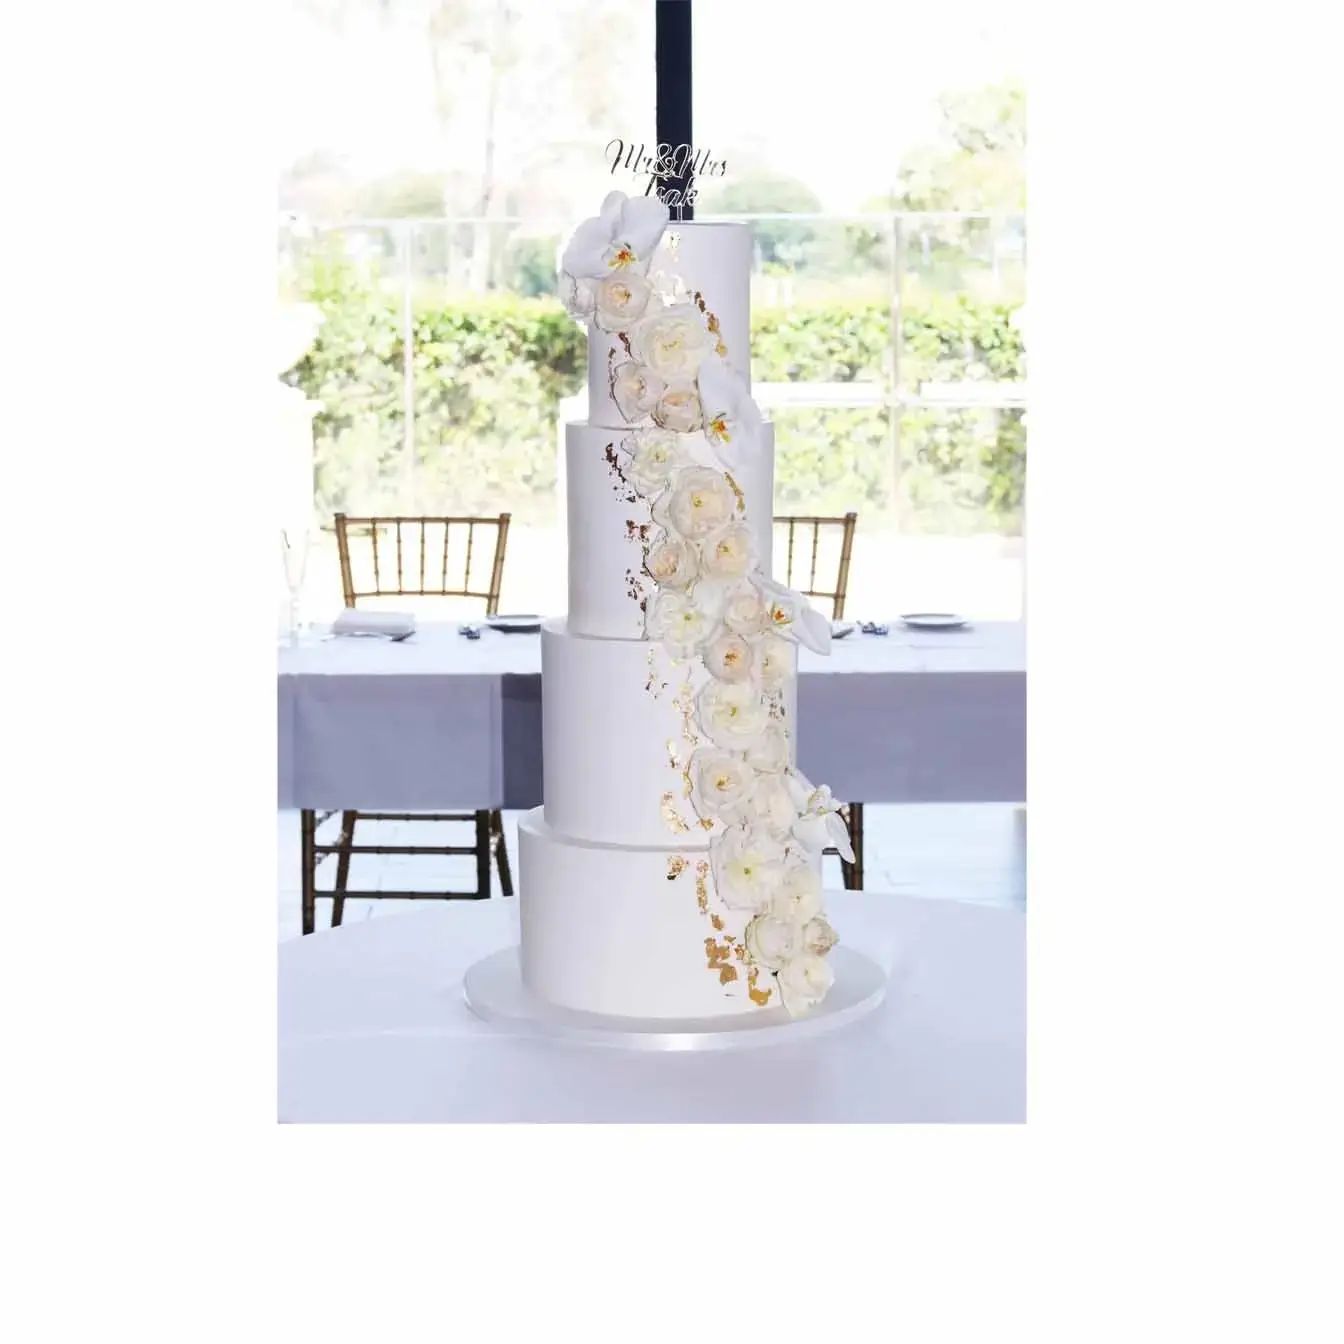 Elegant Gold and Floral Wedding Cake - A four-tier white cake with cascading gold leafing, David Austin roses, white orchids, and a custom name cake topper, a stunning centerpiece for a romantic and elegant wedding celebration.